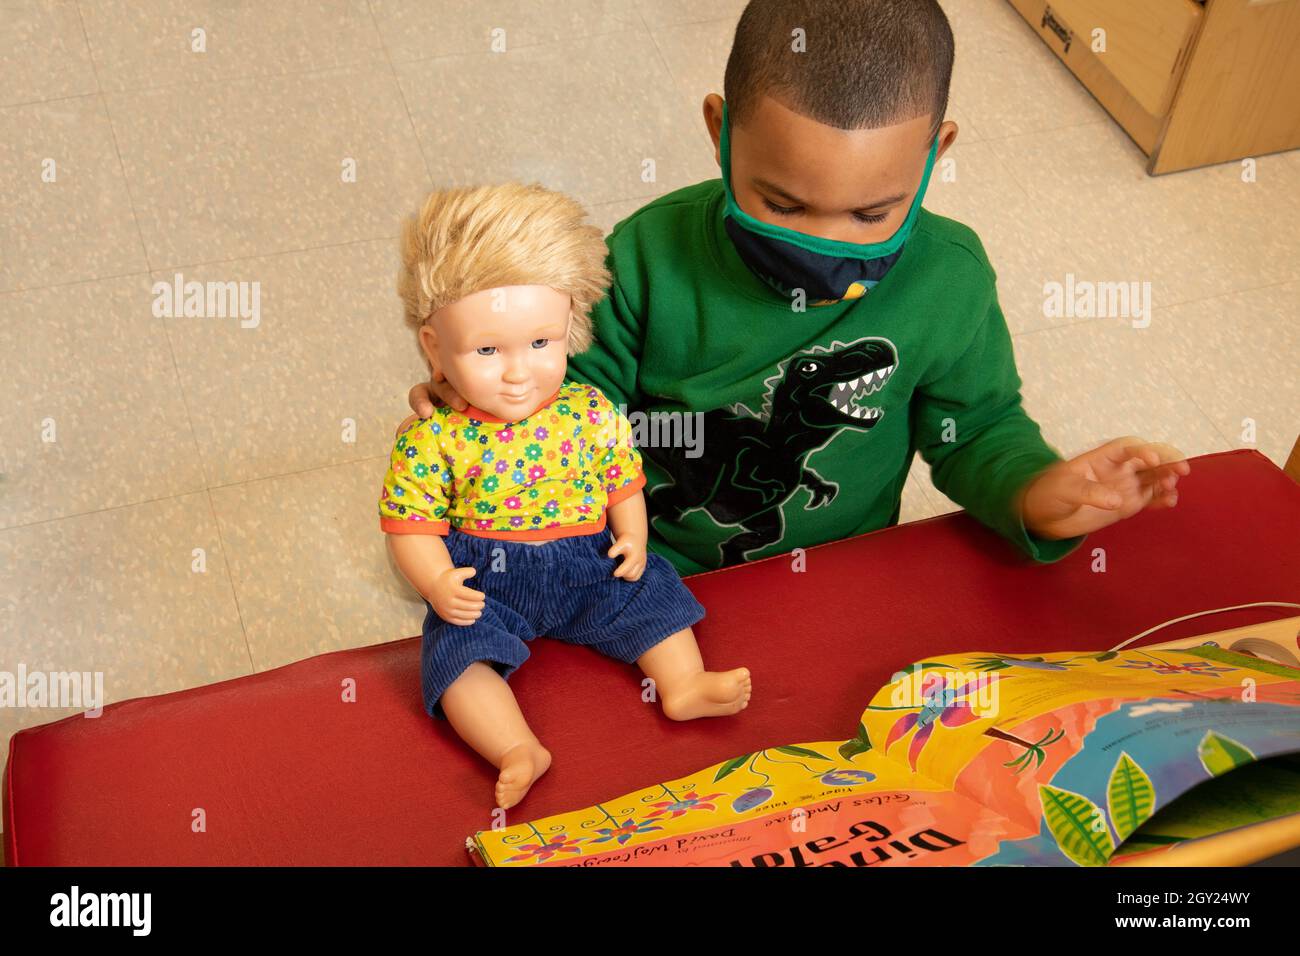 Education Preschool 3-4 year olds boy playingin family area, reading book to doll, book placed so doll can see it Stock Photo